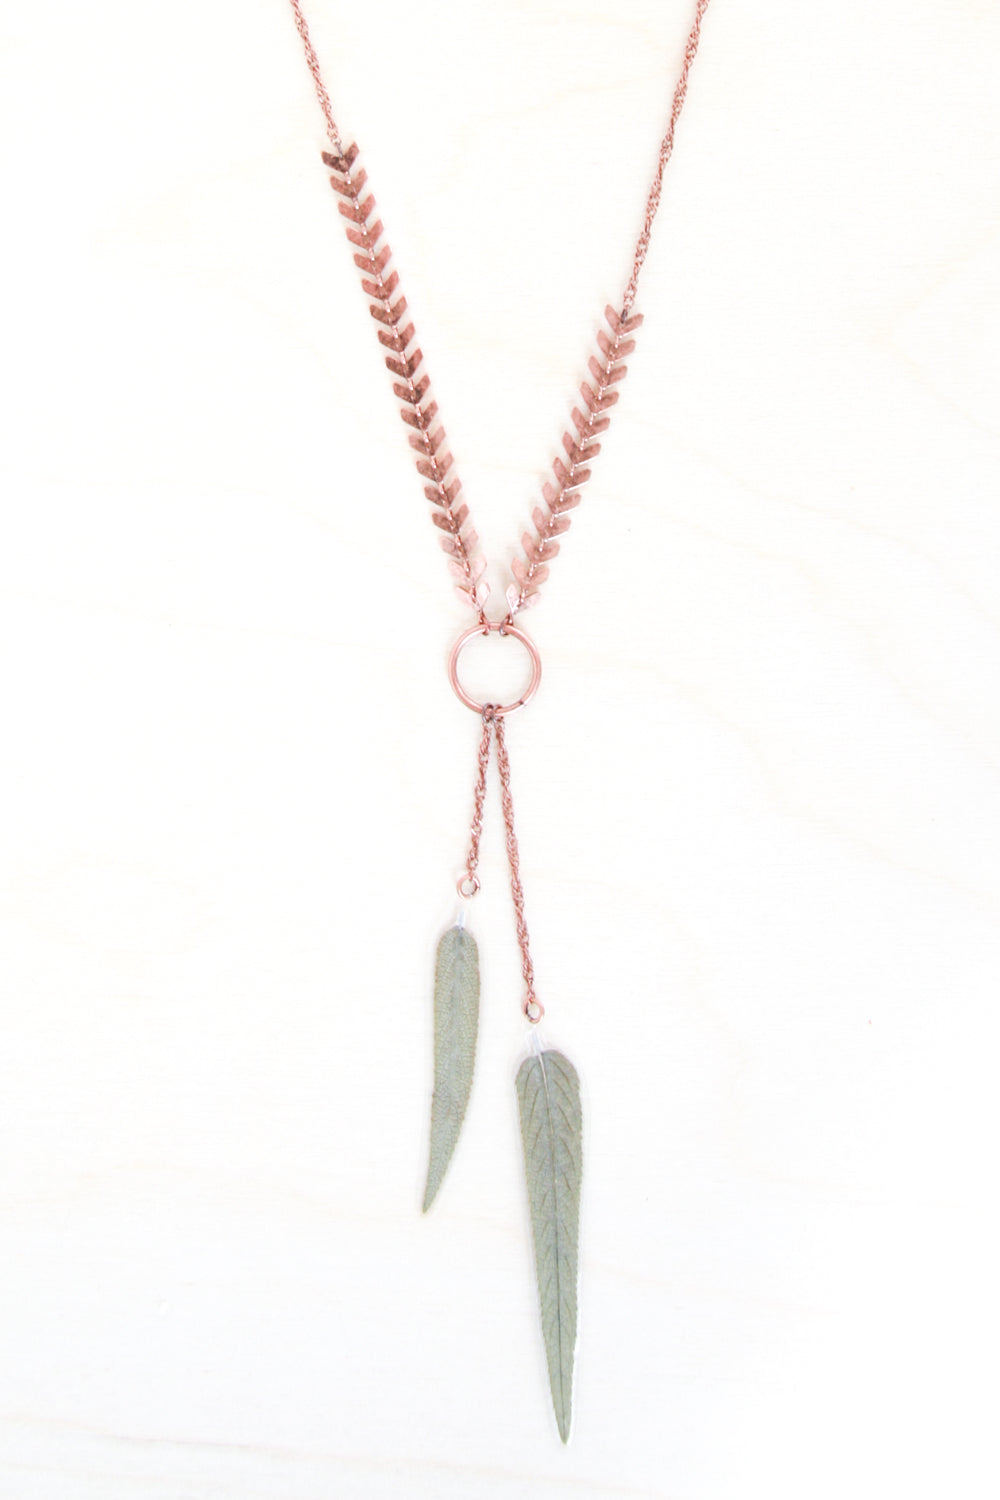 Green Sage Pressed Leaf Necklace with Copper Chevron